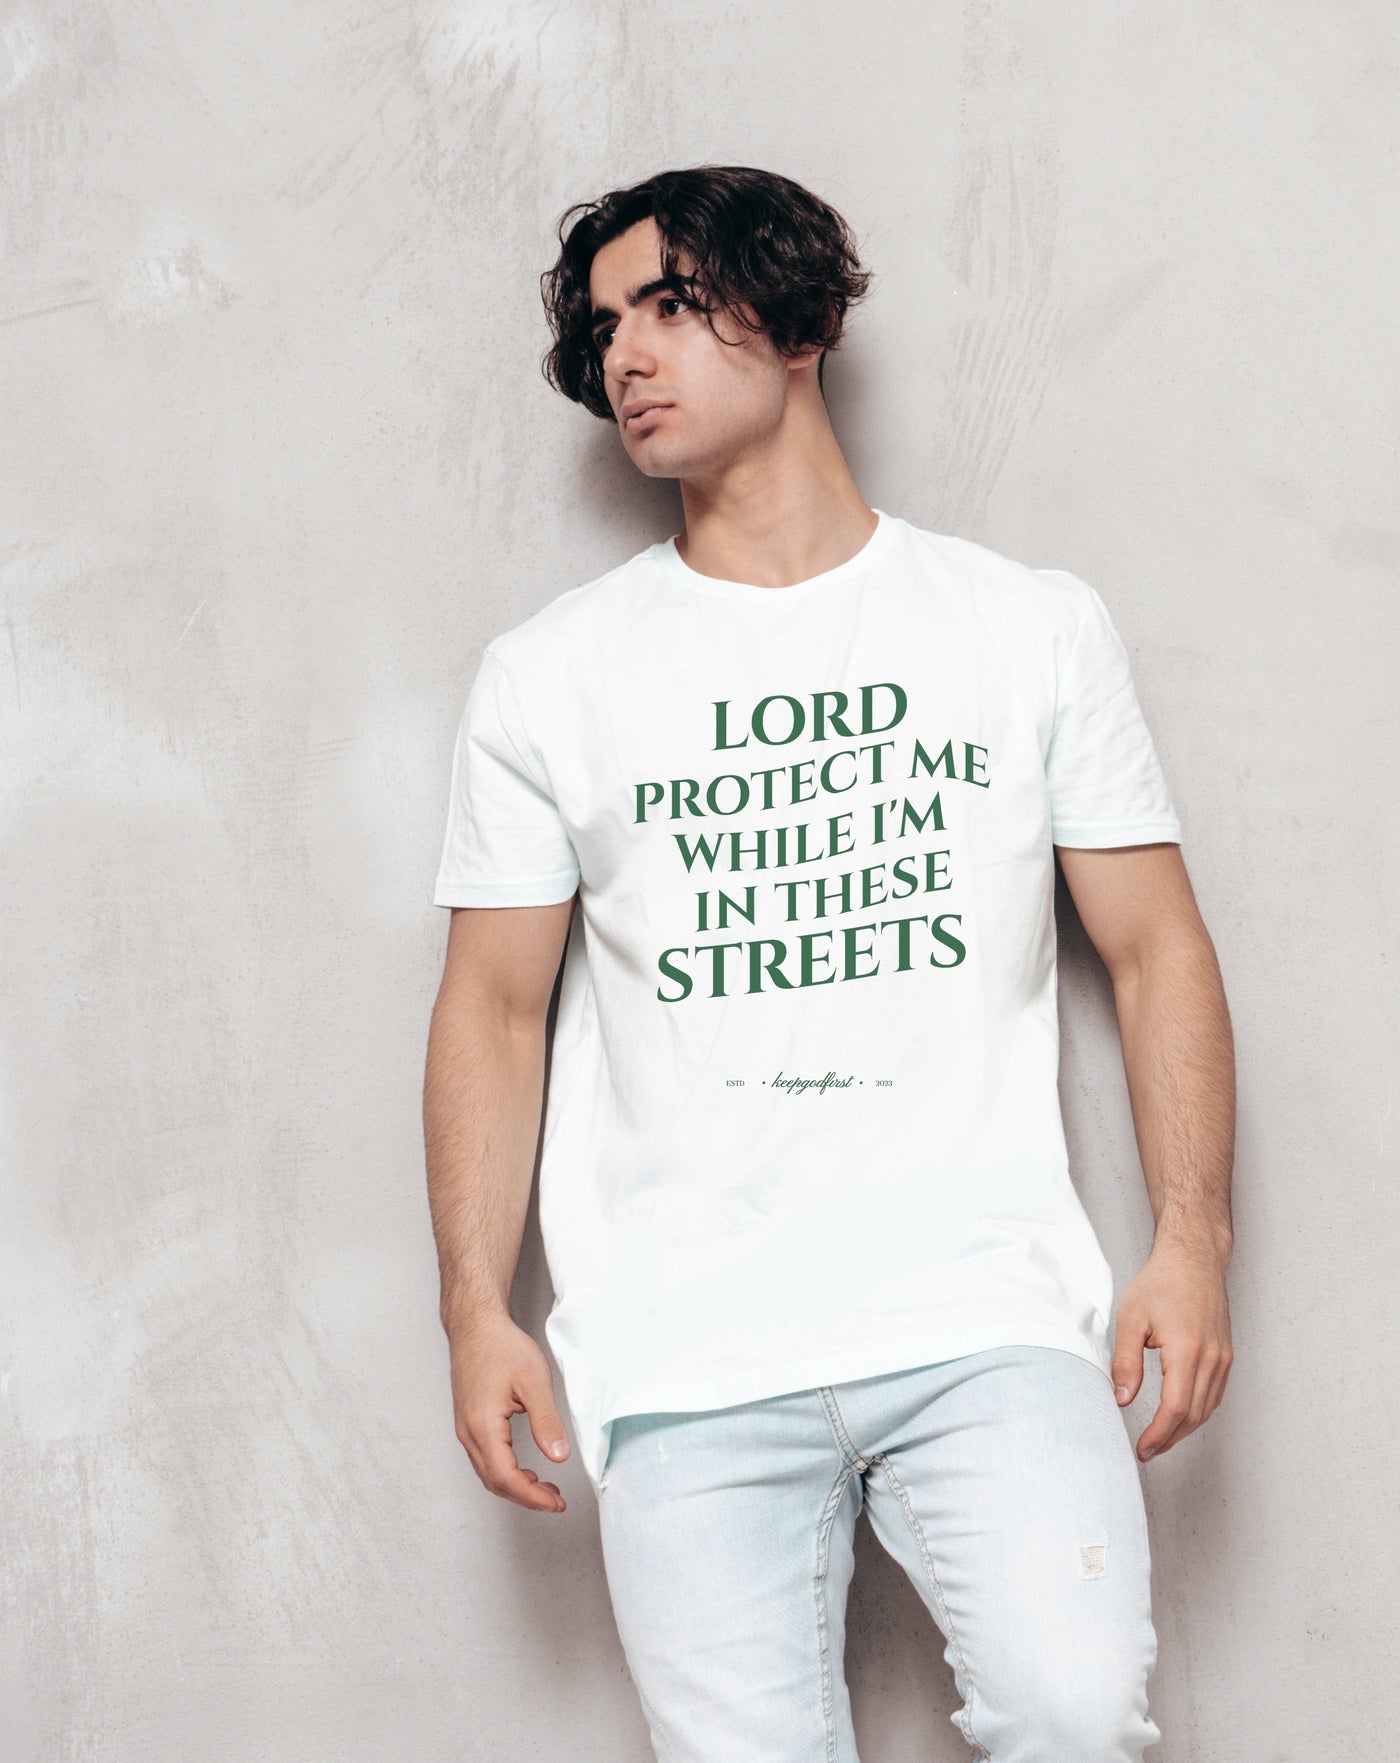 Lord protect me in these streets Shirt